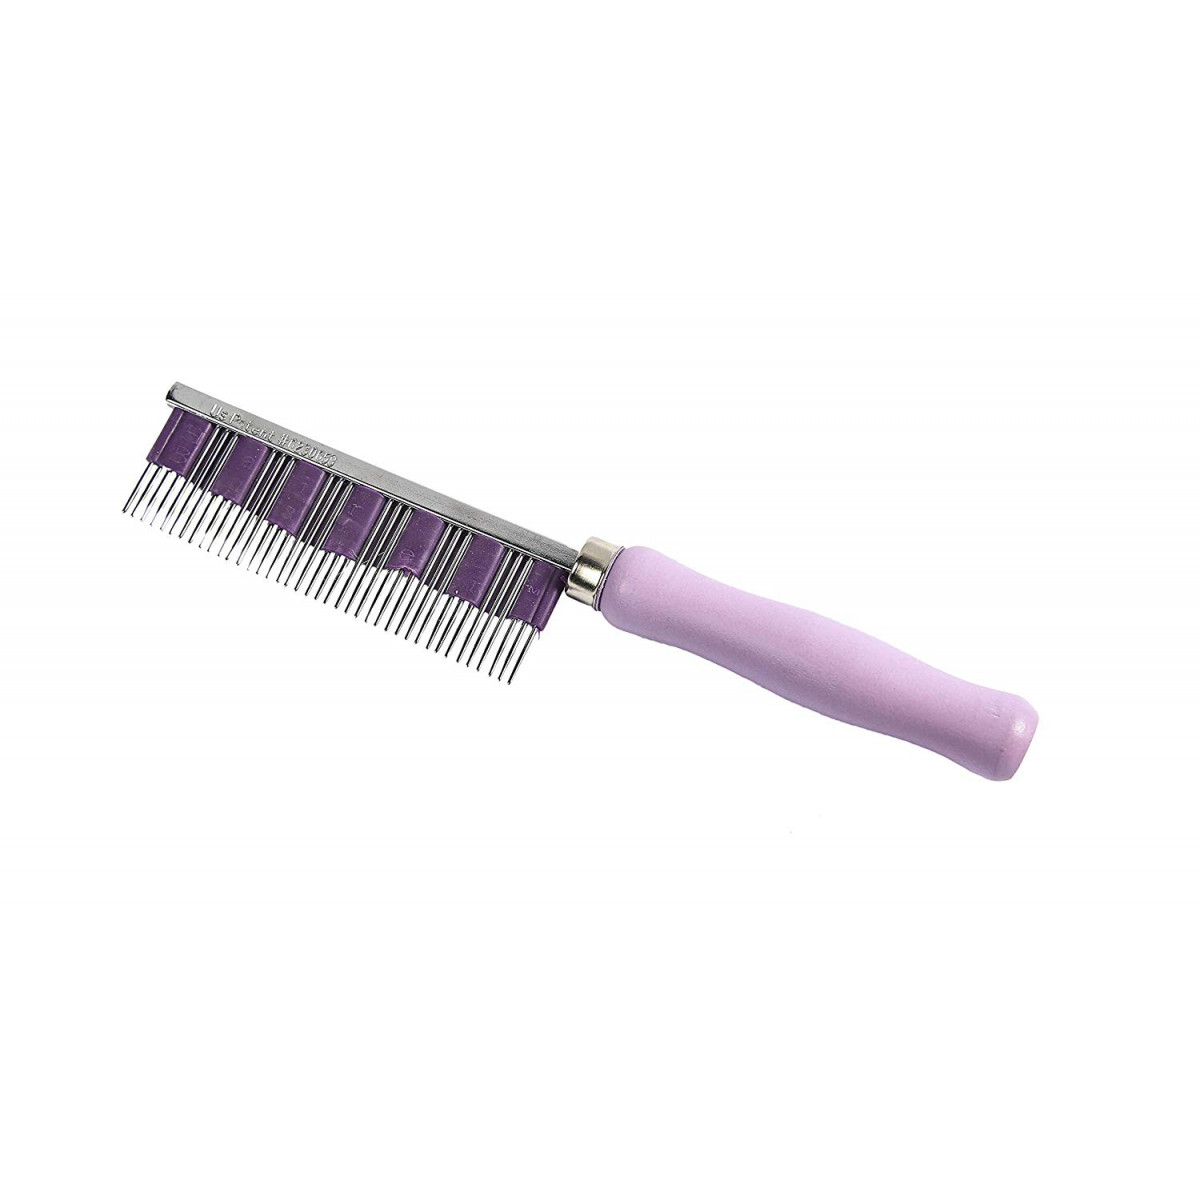 HairBuster Comb - Small Pet Select U.S.